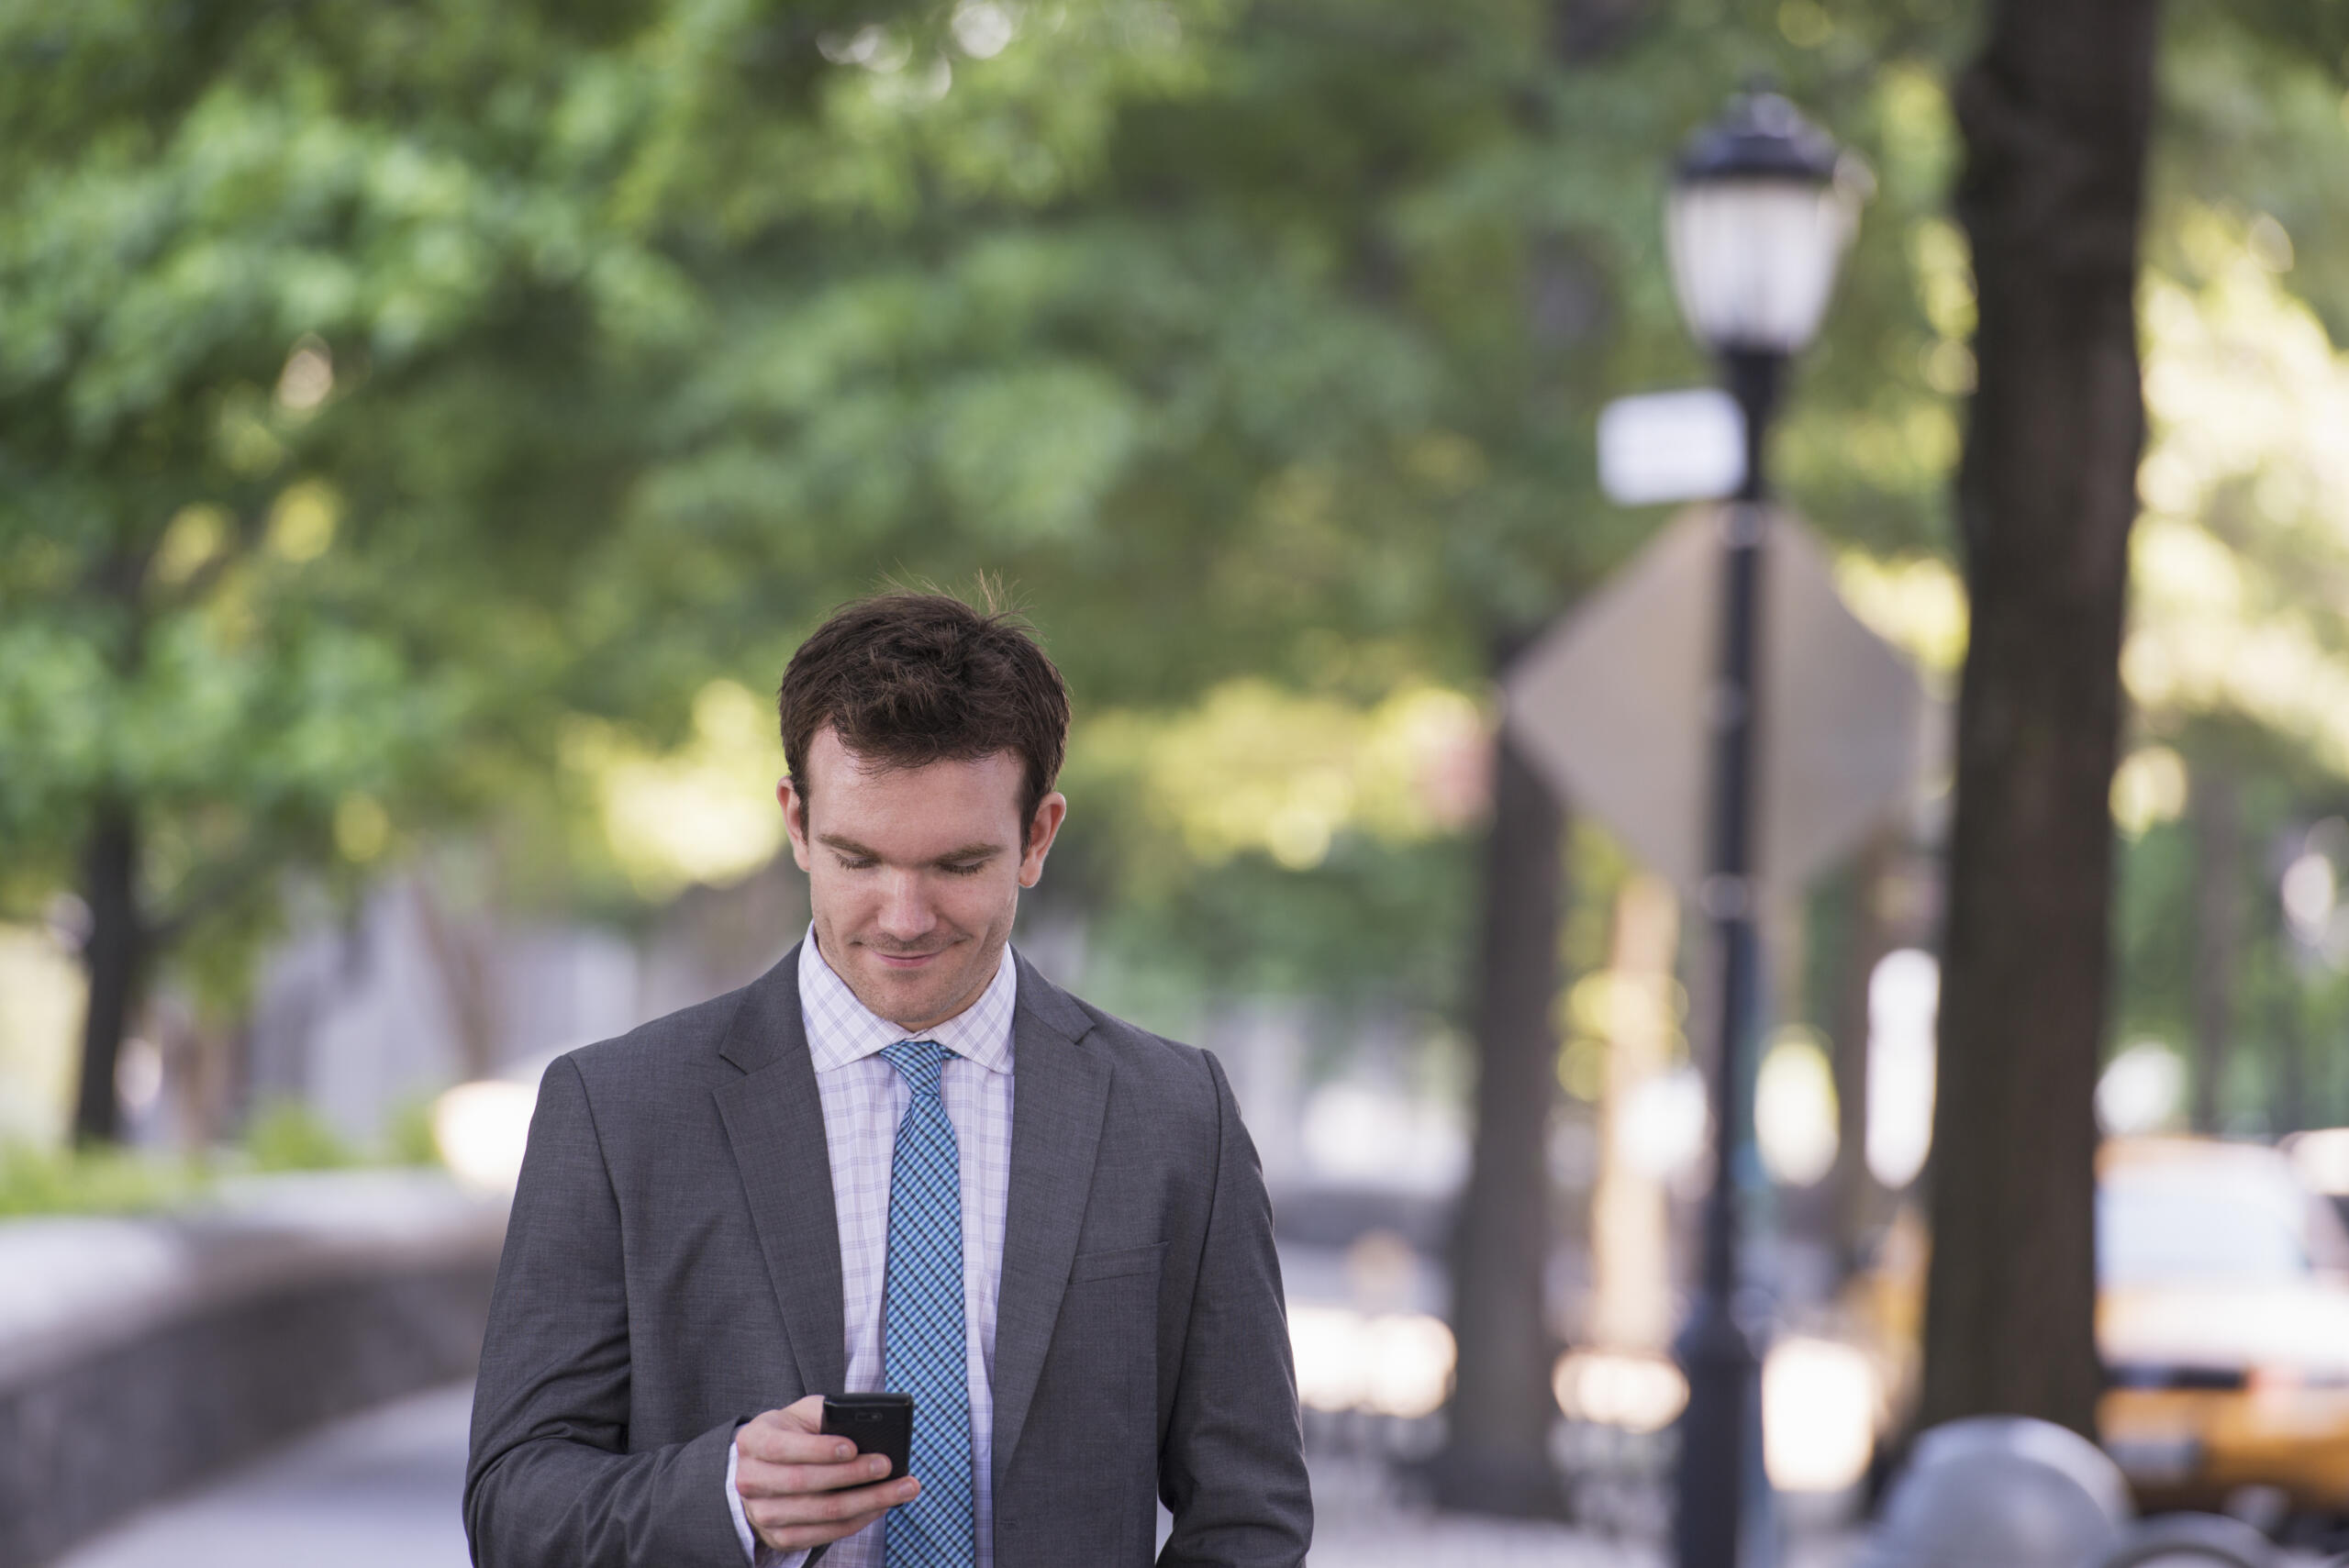 Attorney answering services: lawyer looks at his phone while walking outside on a sunny day